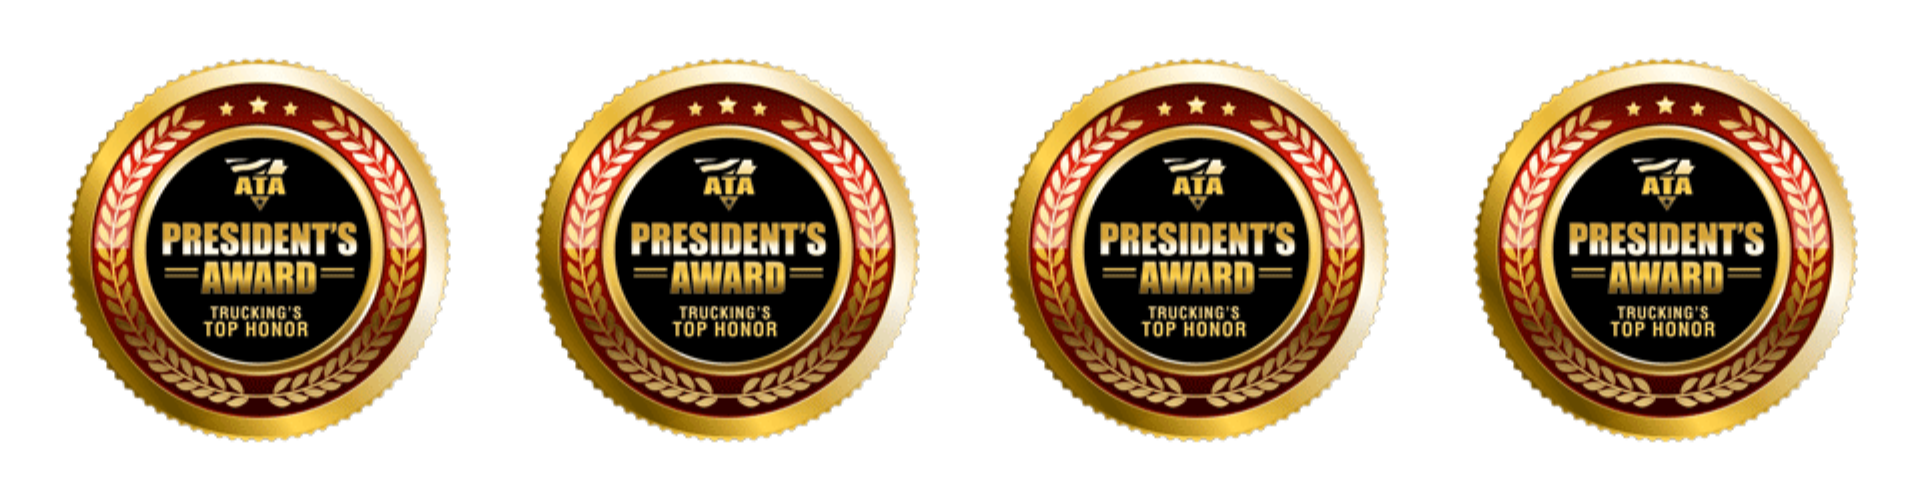 ATA President's Trophy Graphic